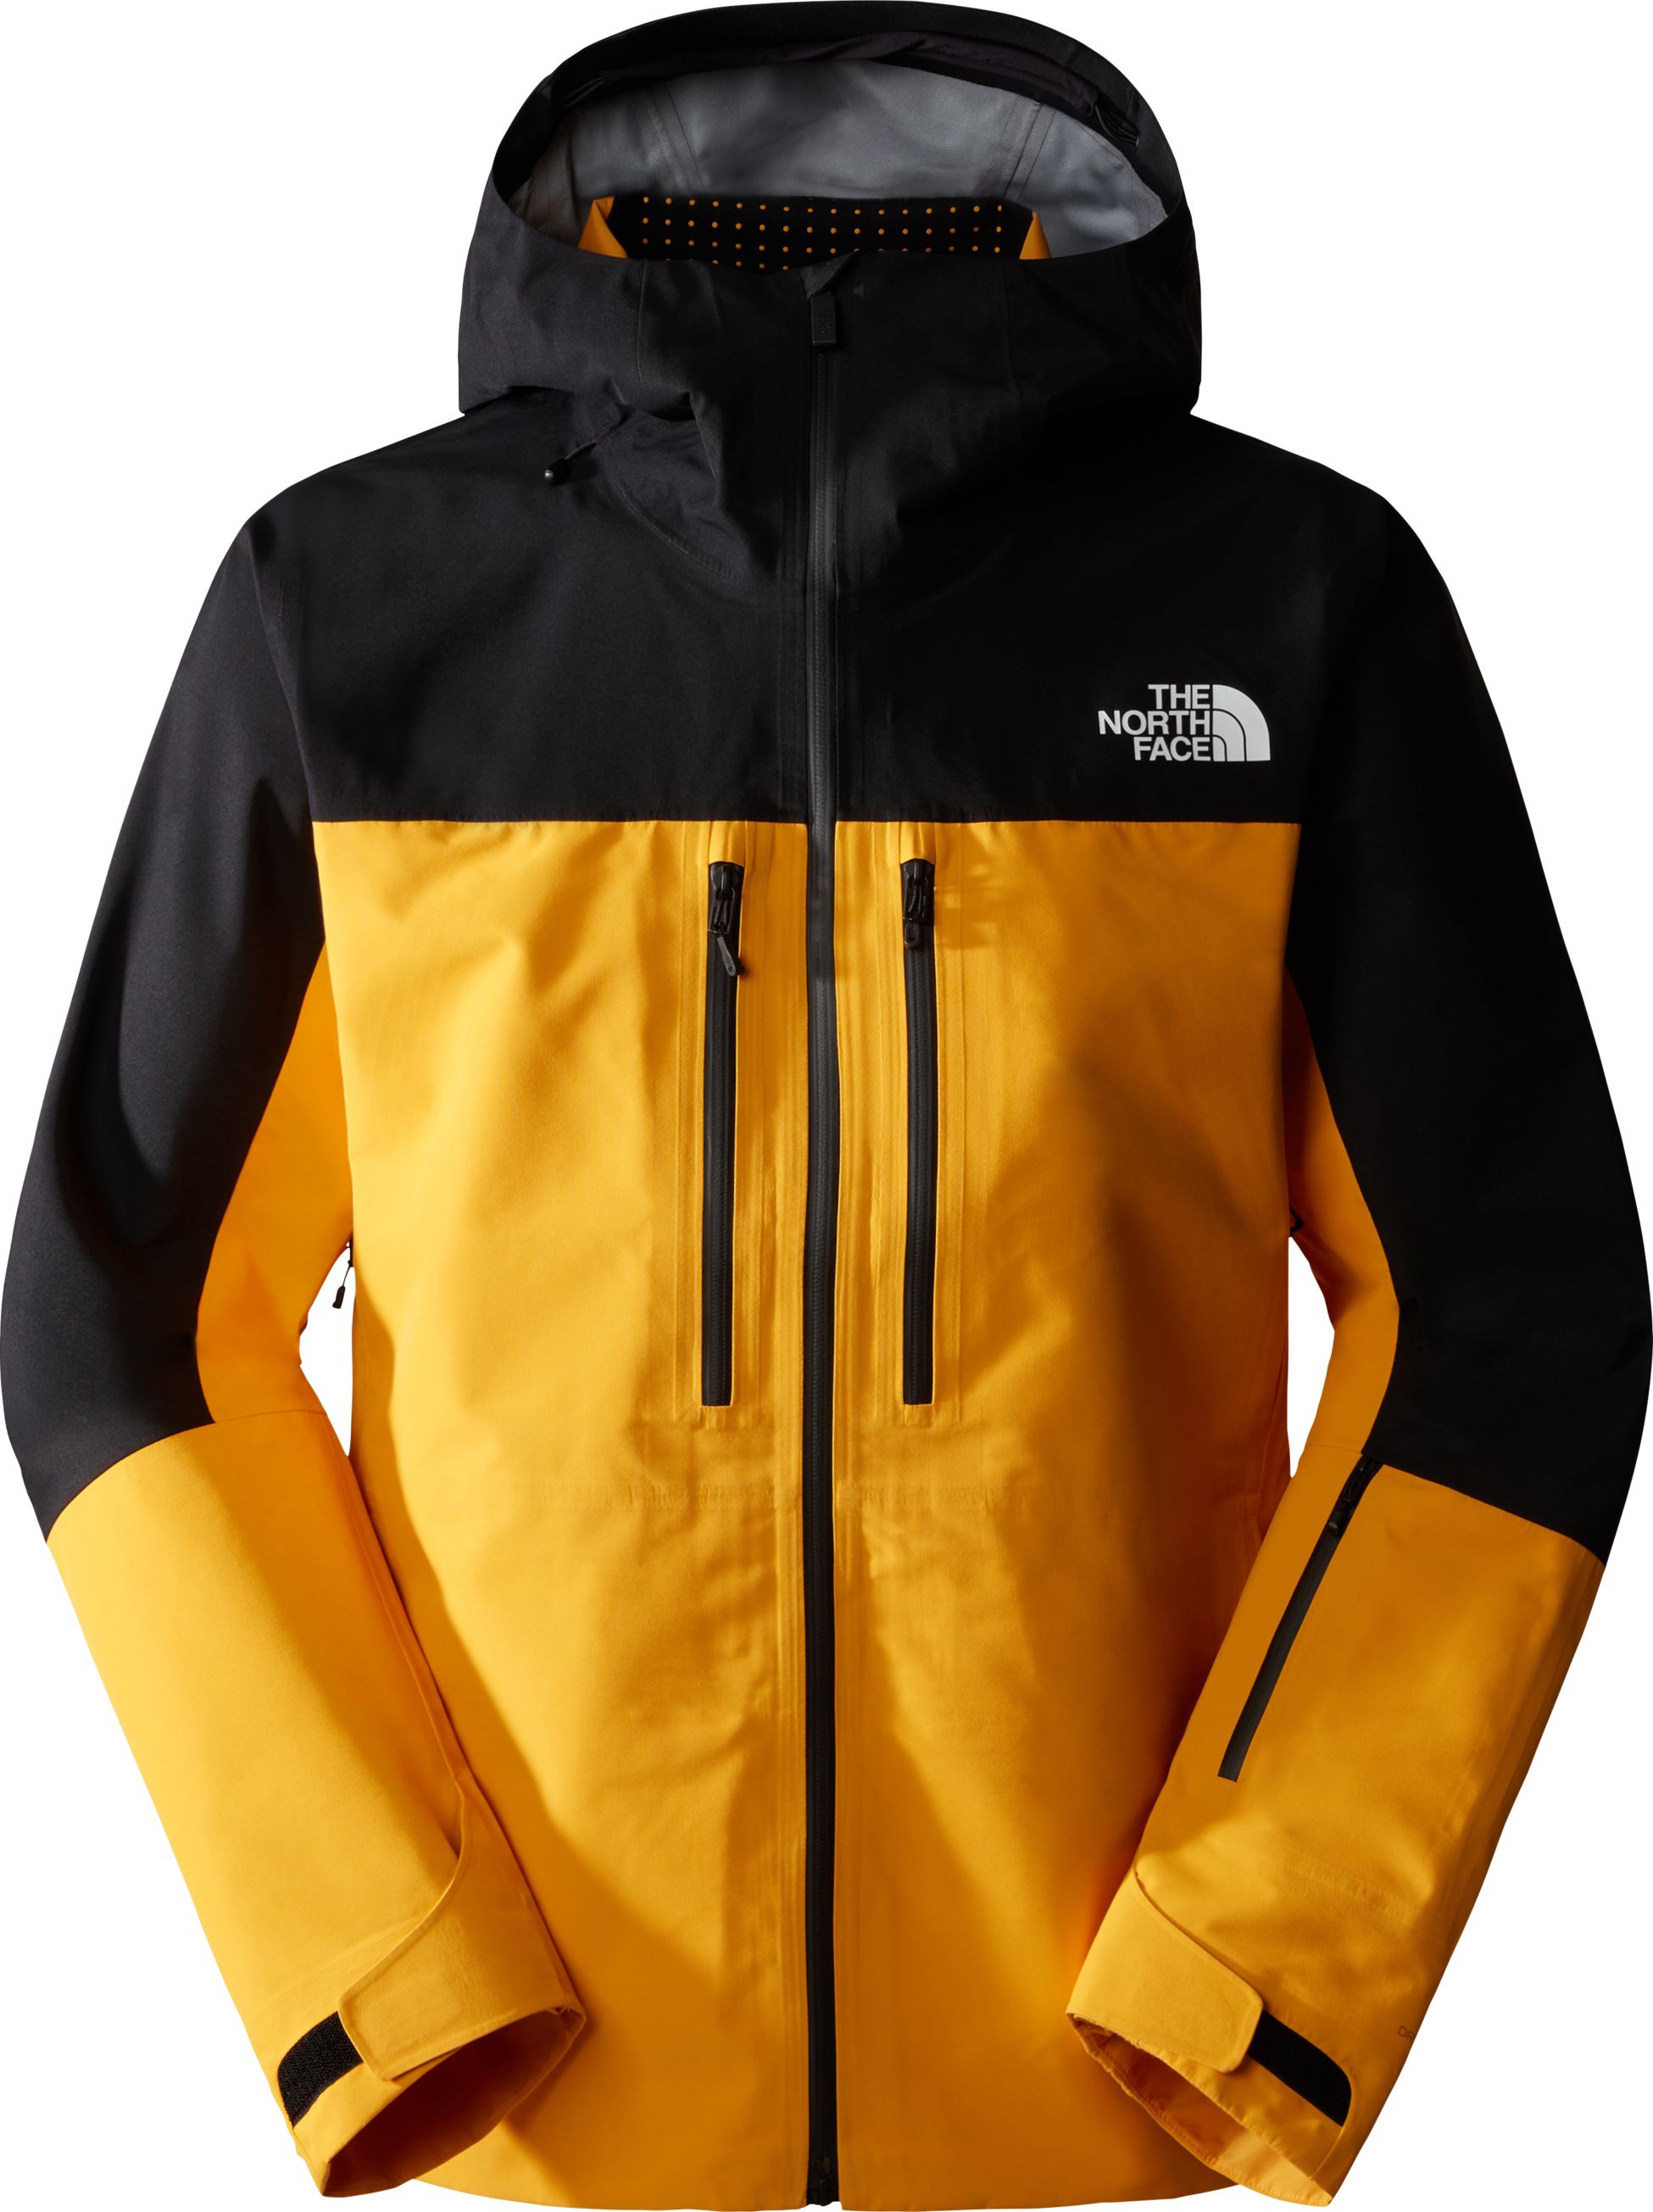 THE NORTH FACE, M CEPTOR JACKET